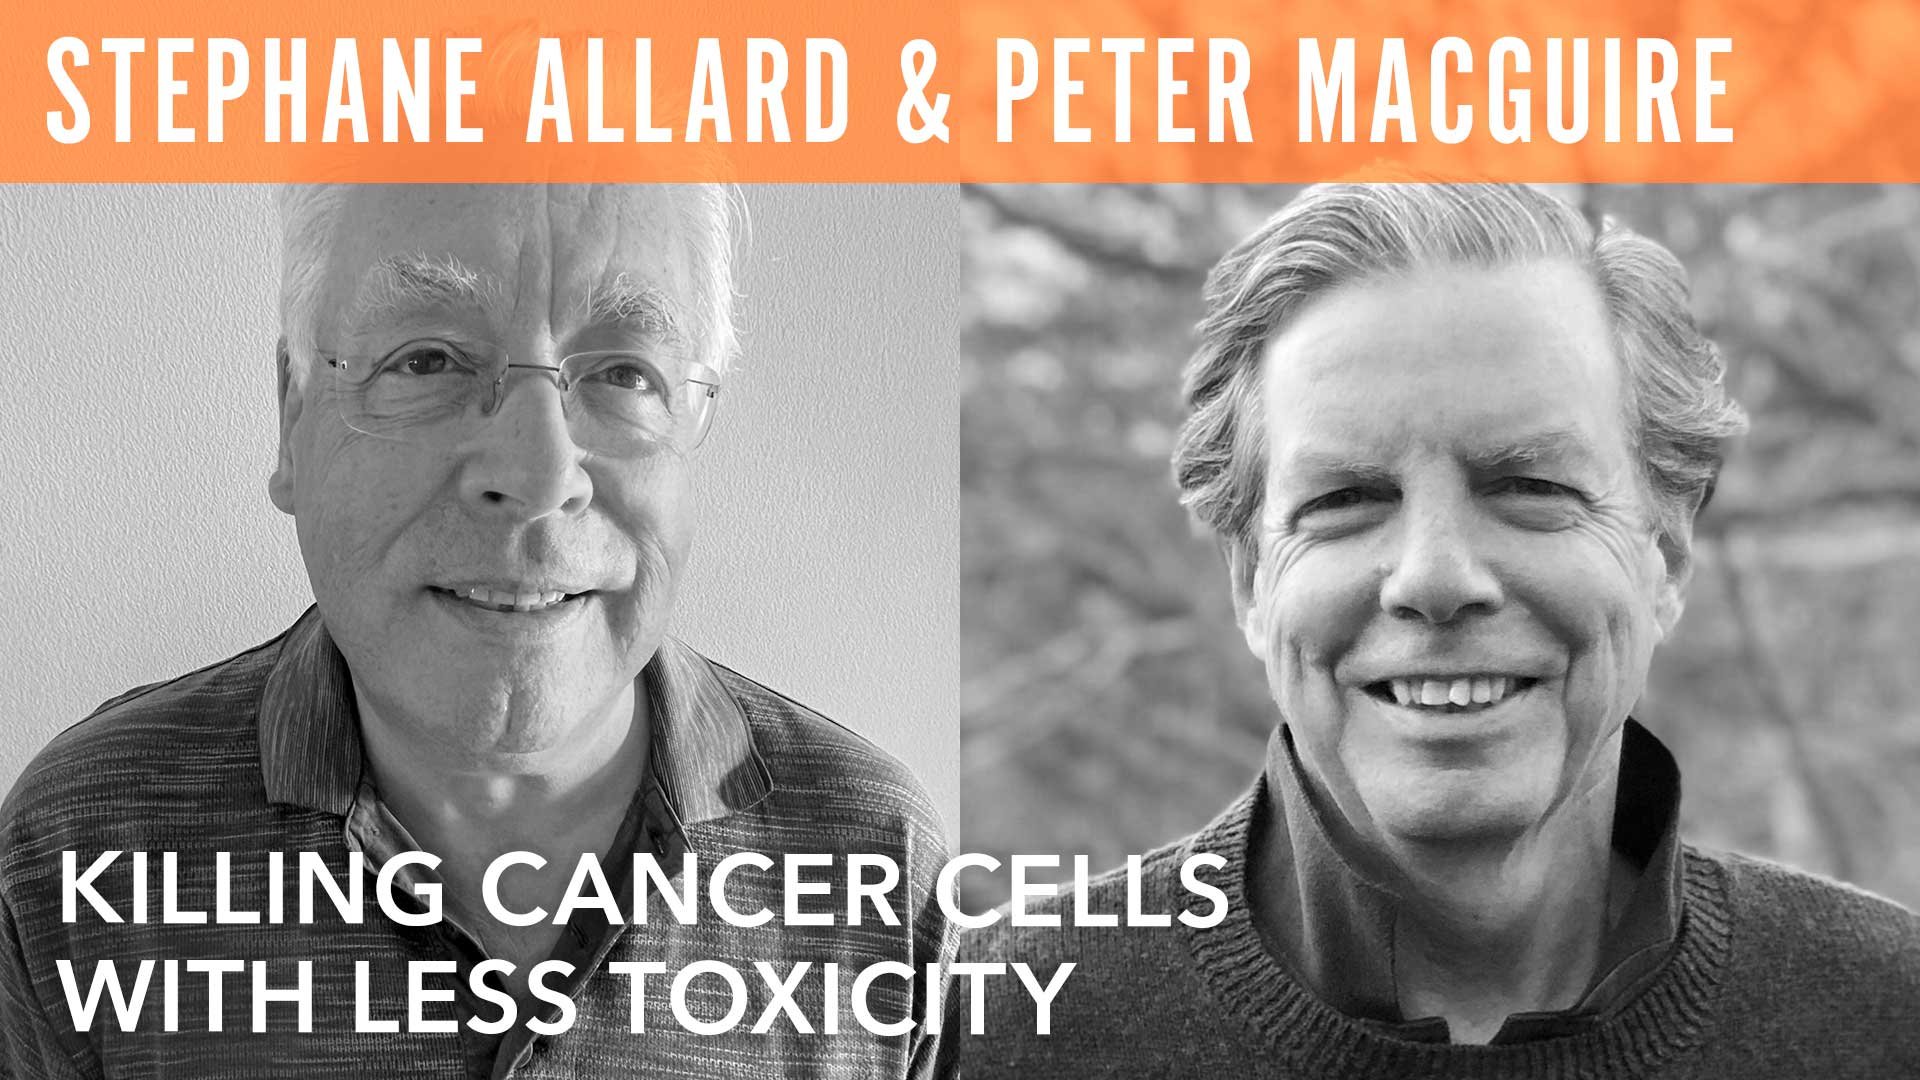 Stephane Allard & Peter MacGuire, "Killing Cancer Cells with Less Toxicity"